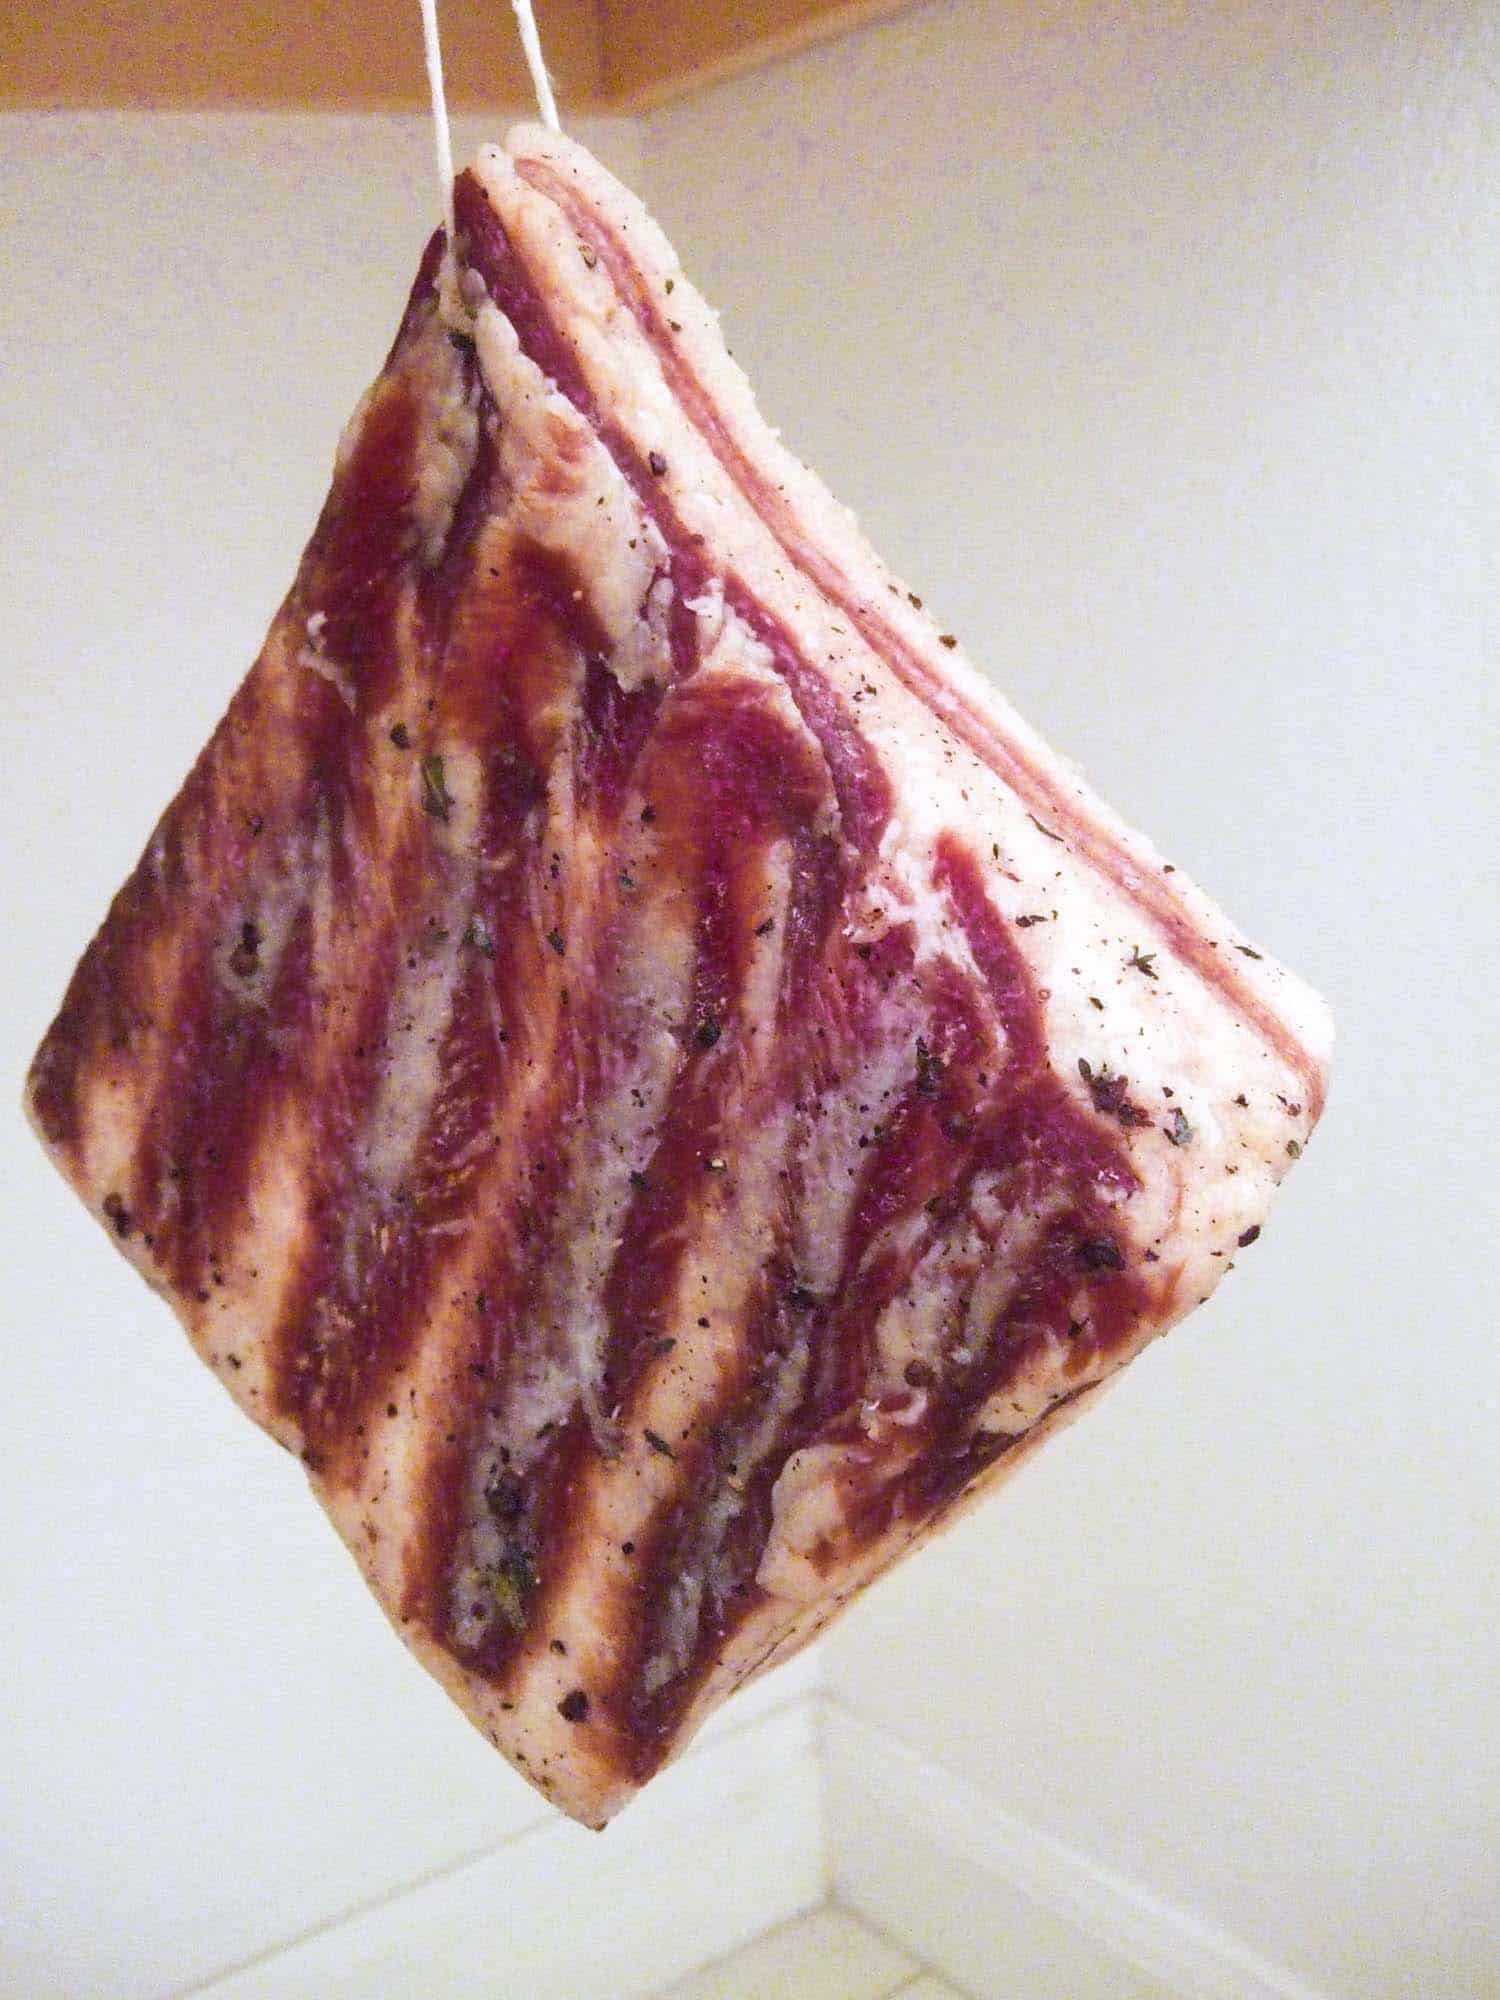 Pancetta hanging while curing, a final step in making pancetta